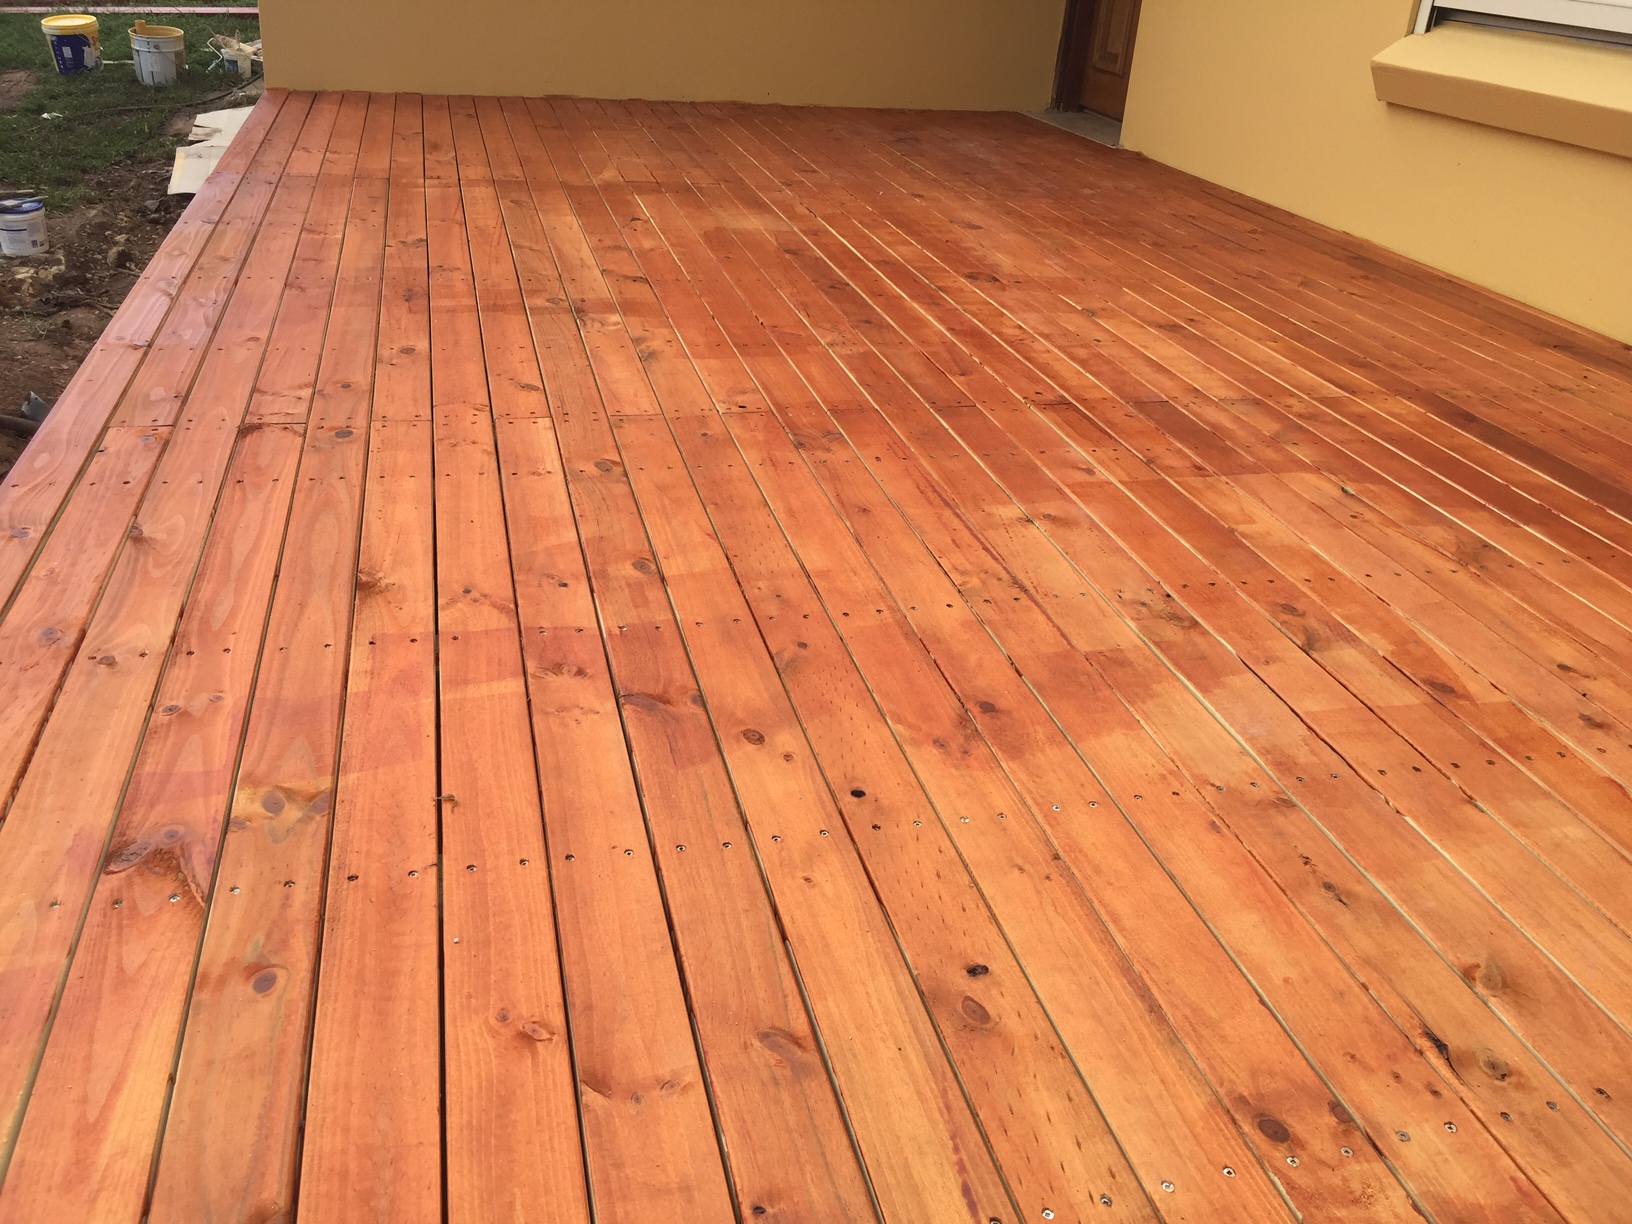 10 Signs It’s Time For Timber Floor Restoration In Your Home